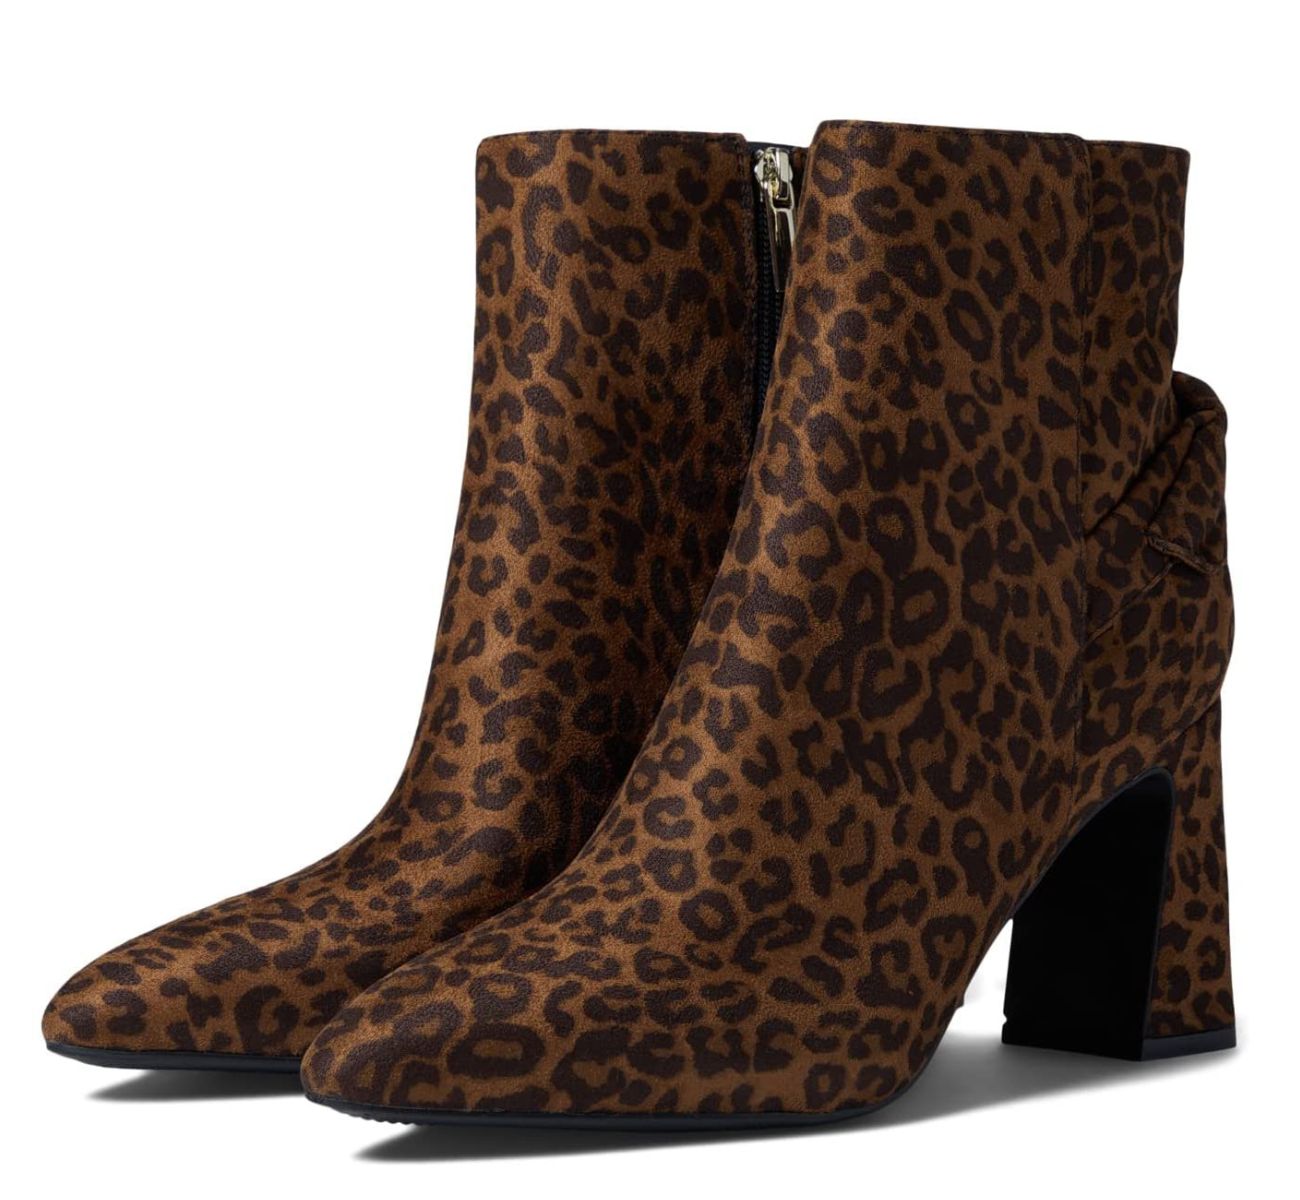 Brown leopard print pointed toe block heel boots on white background.